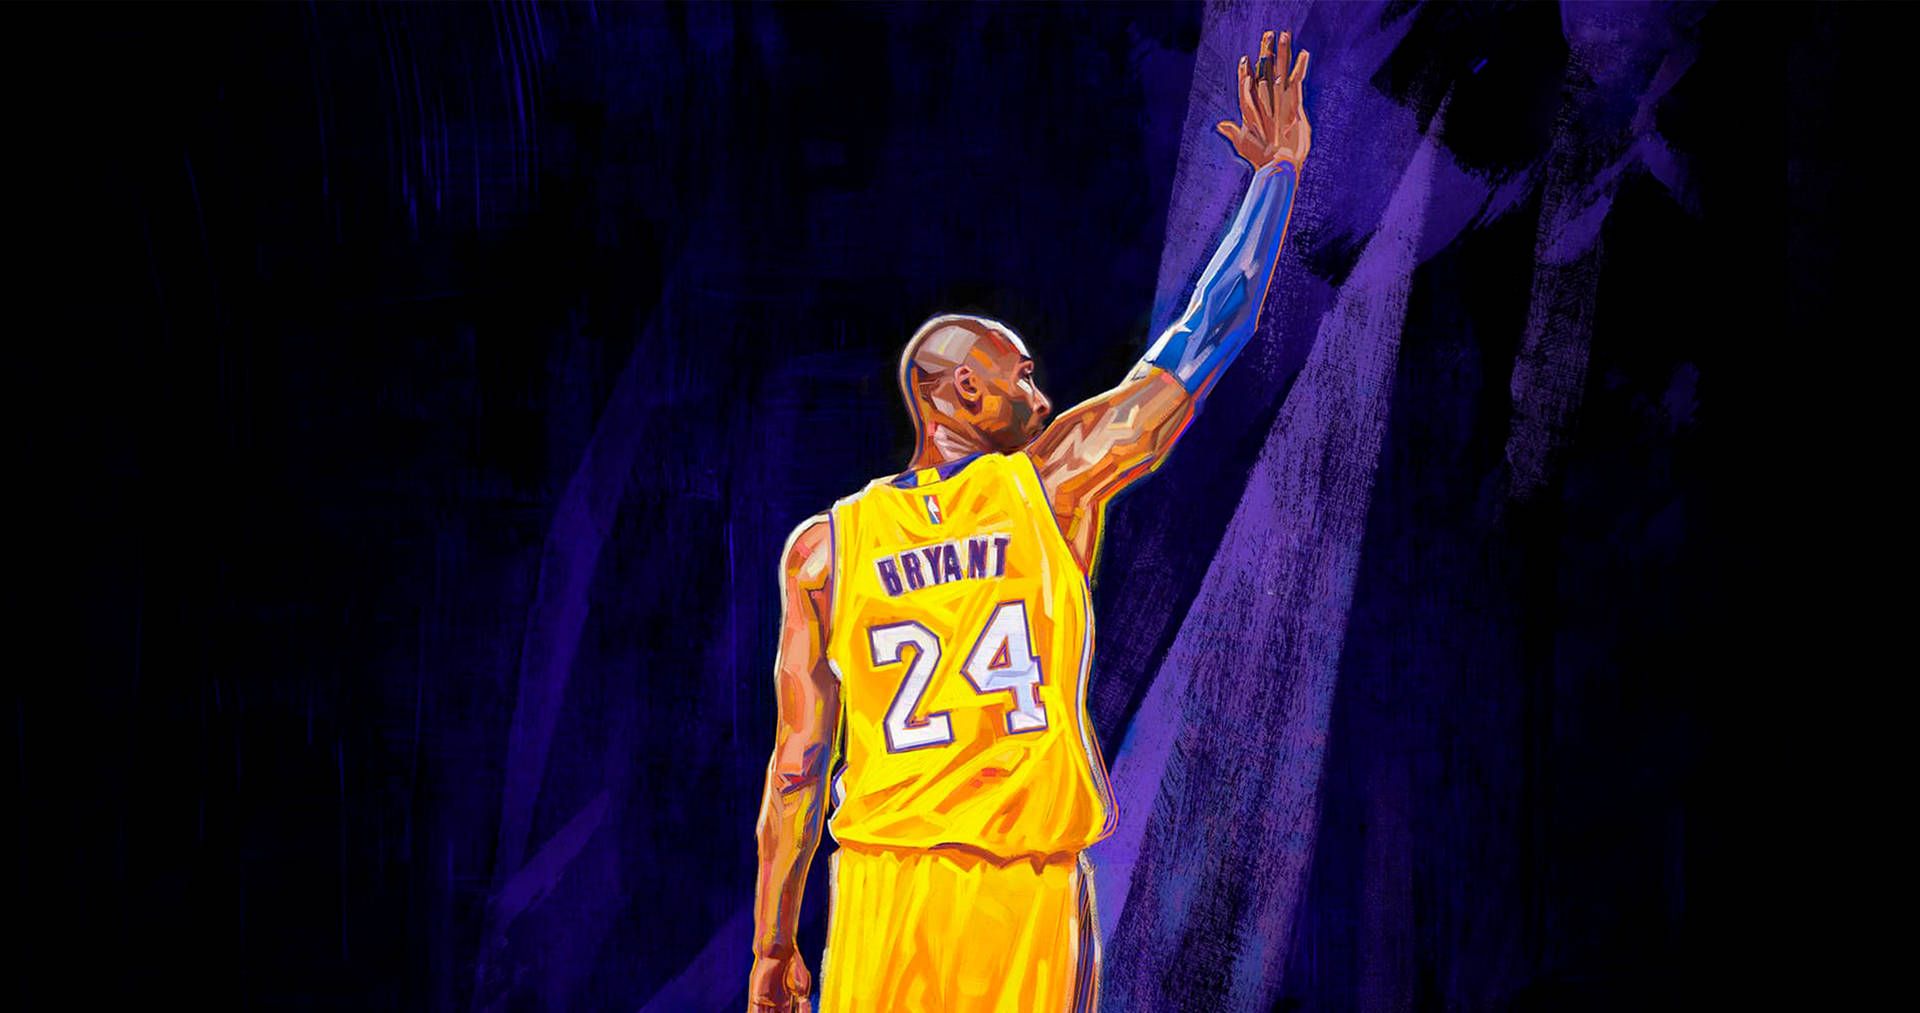 A painting of Kobe Bryant in his Lakers jersey, waving to the crowd. - Kobe Bryant